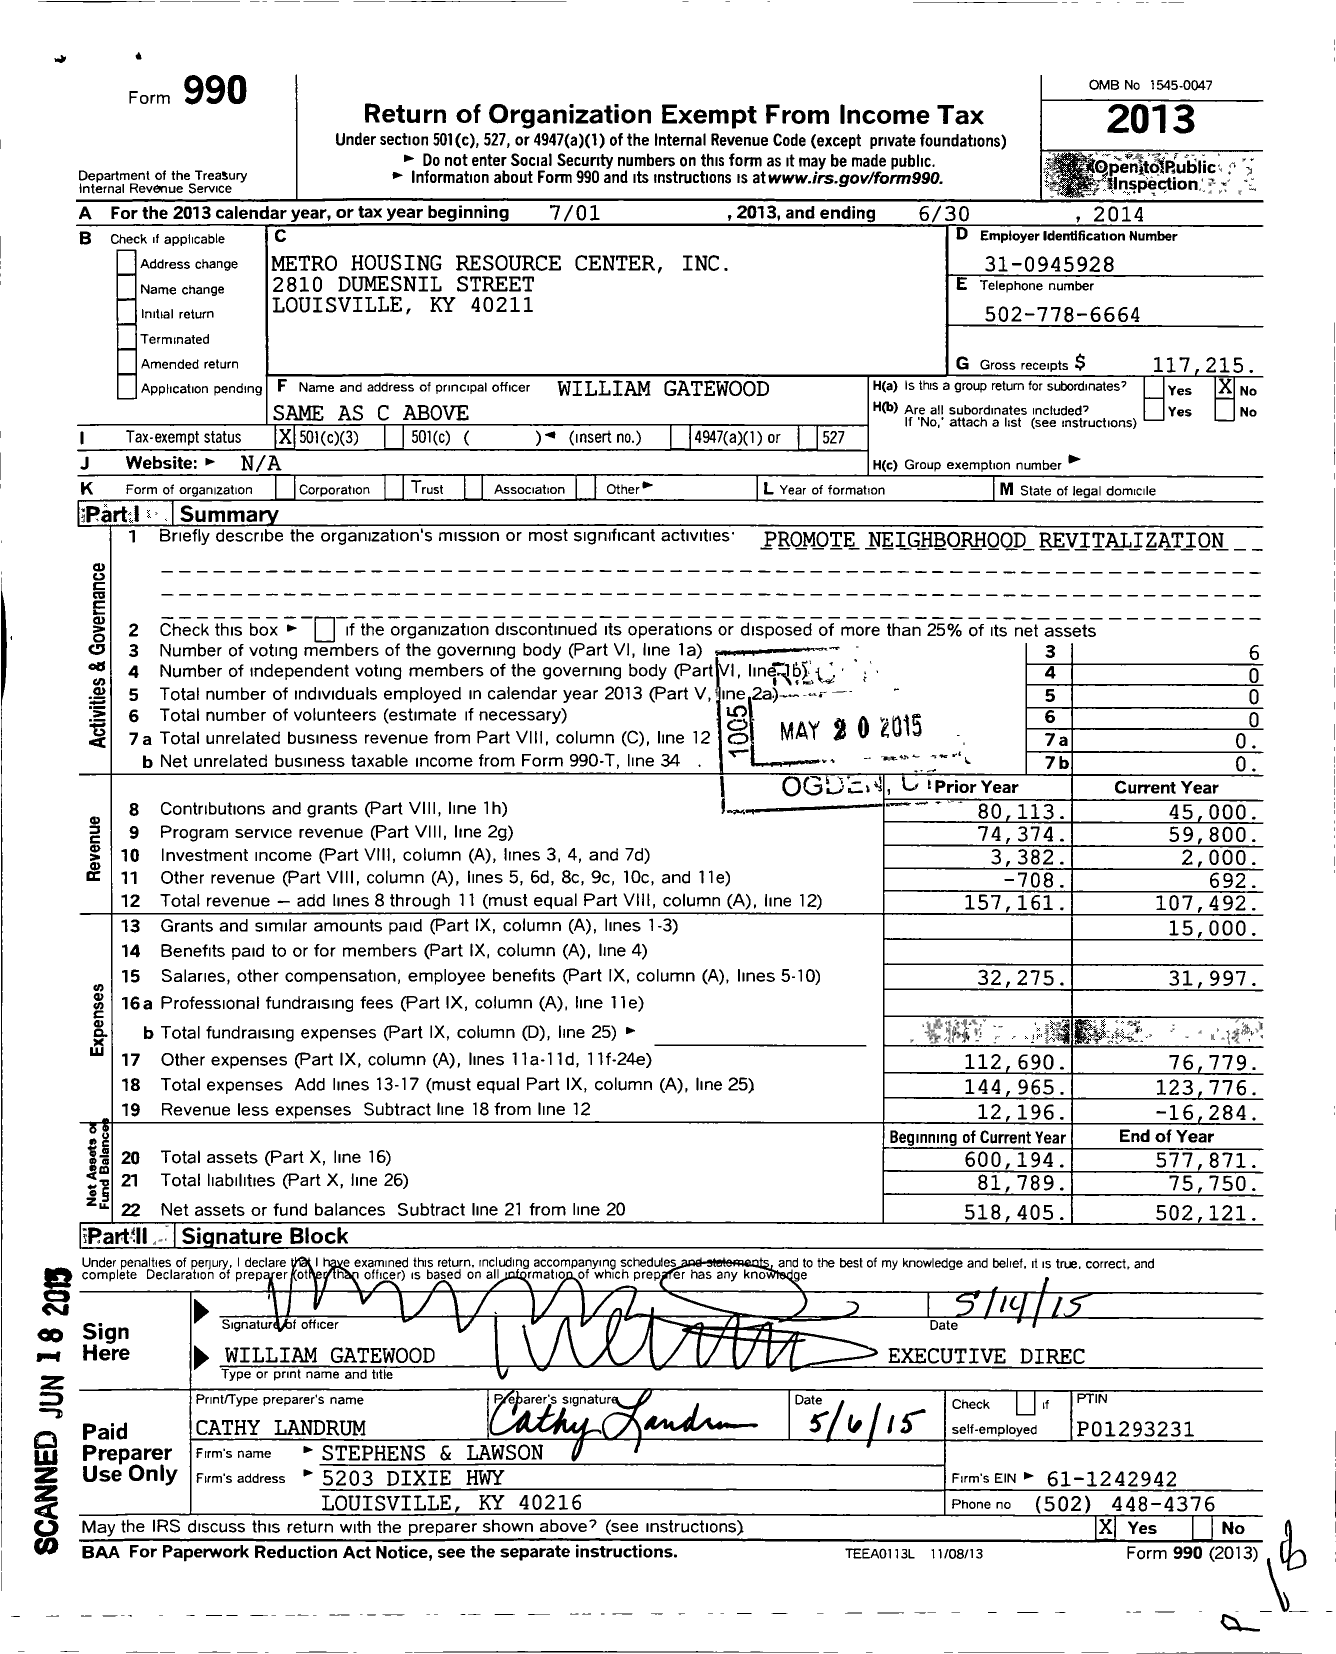 Image of first page of 2013 Form 990 for Metro Housing Resource Center